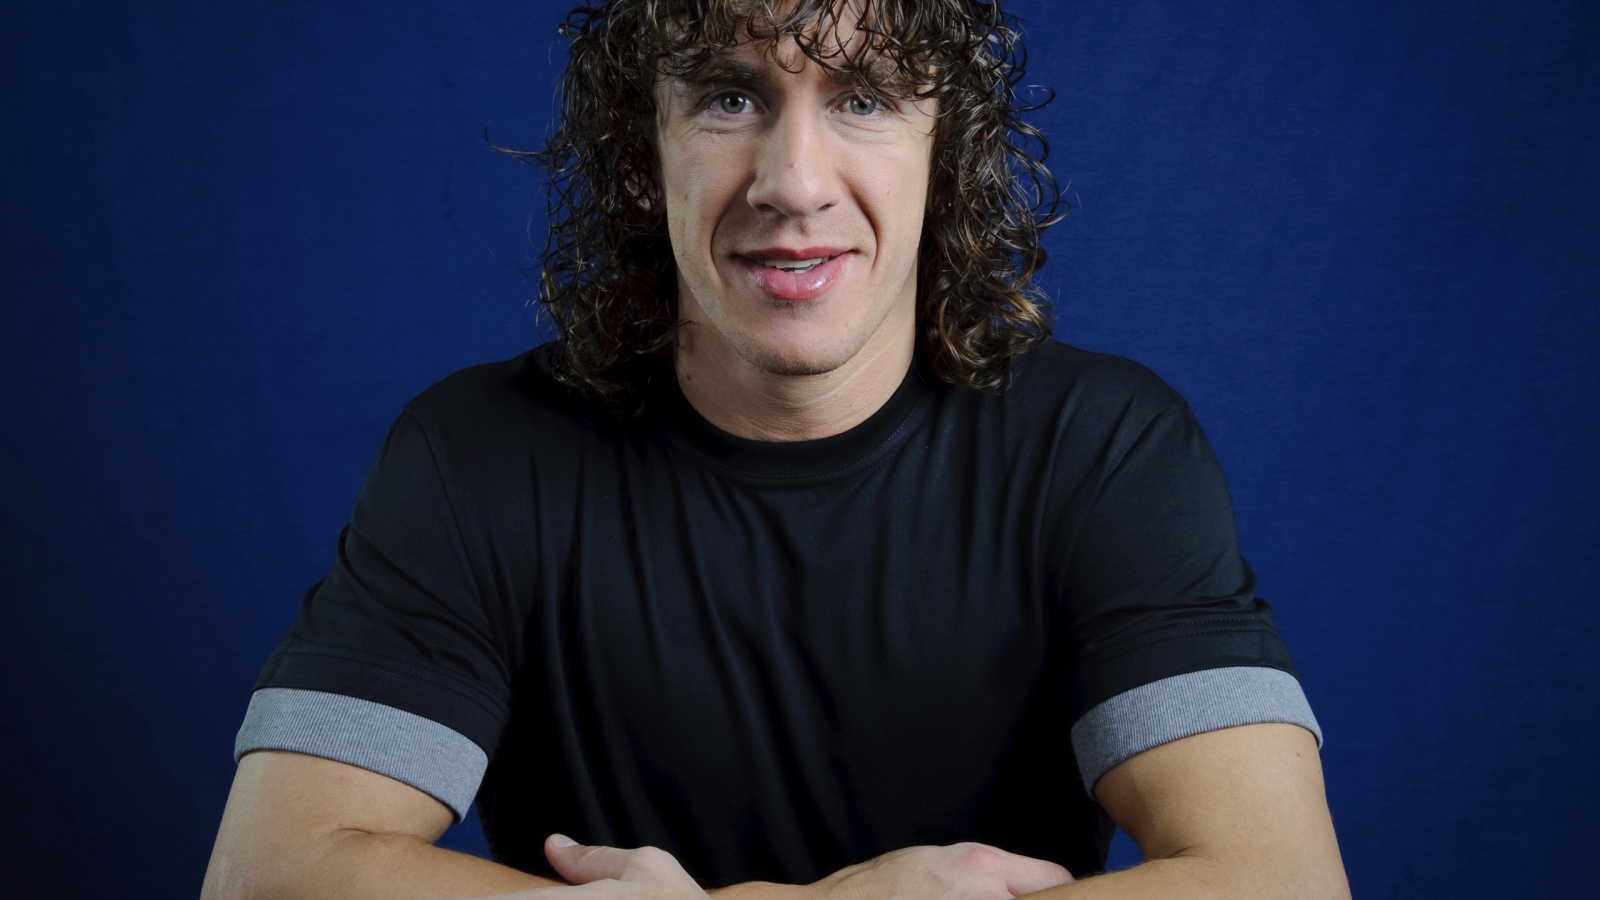 Carles Puyol Smile for 1600 x 900 HDTV resolution